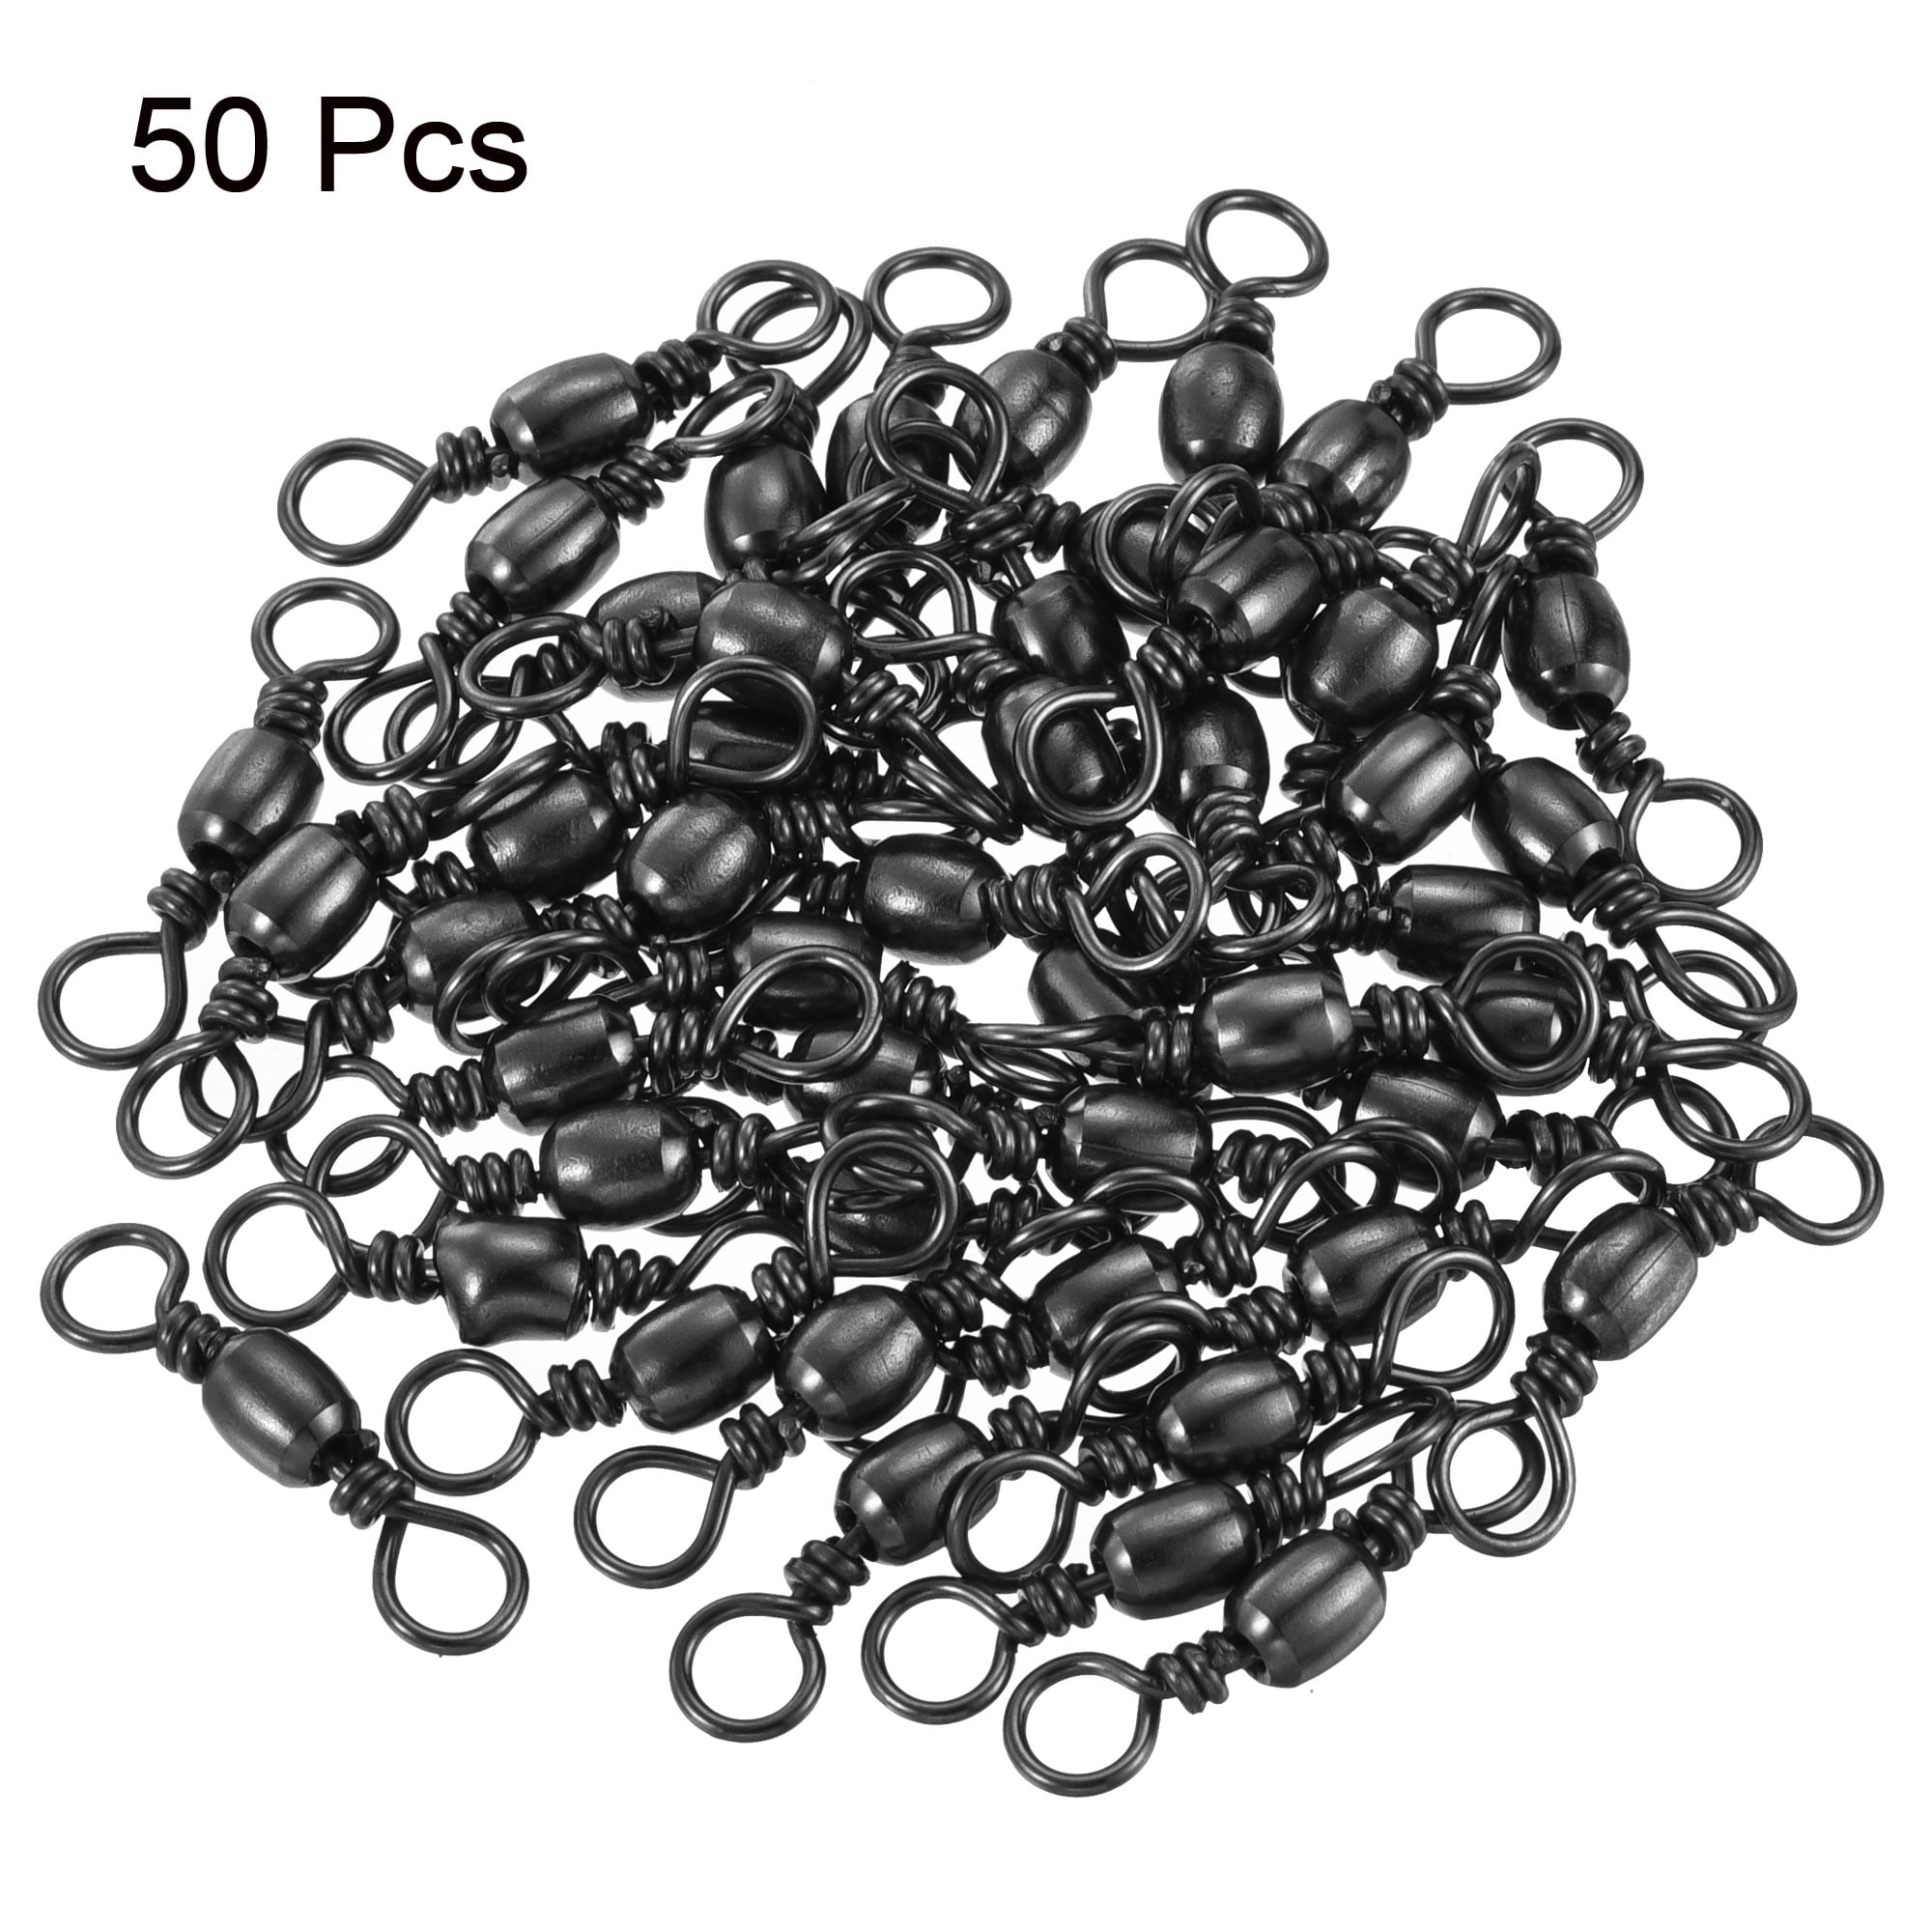 Uxcell 110LBS Stainless Steel Fishing Barrel Swivels, Black 50 Pack 